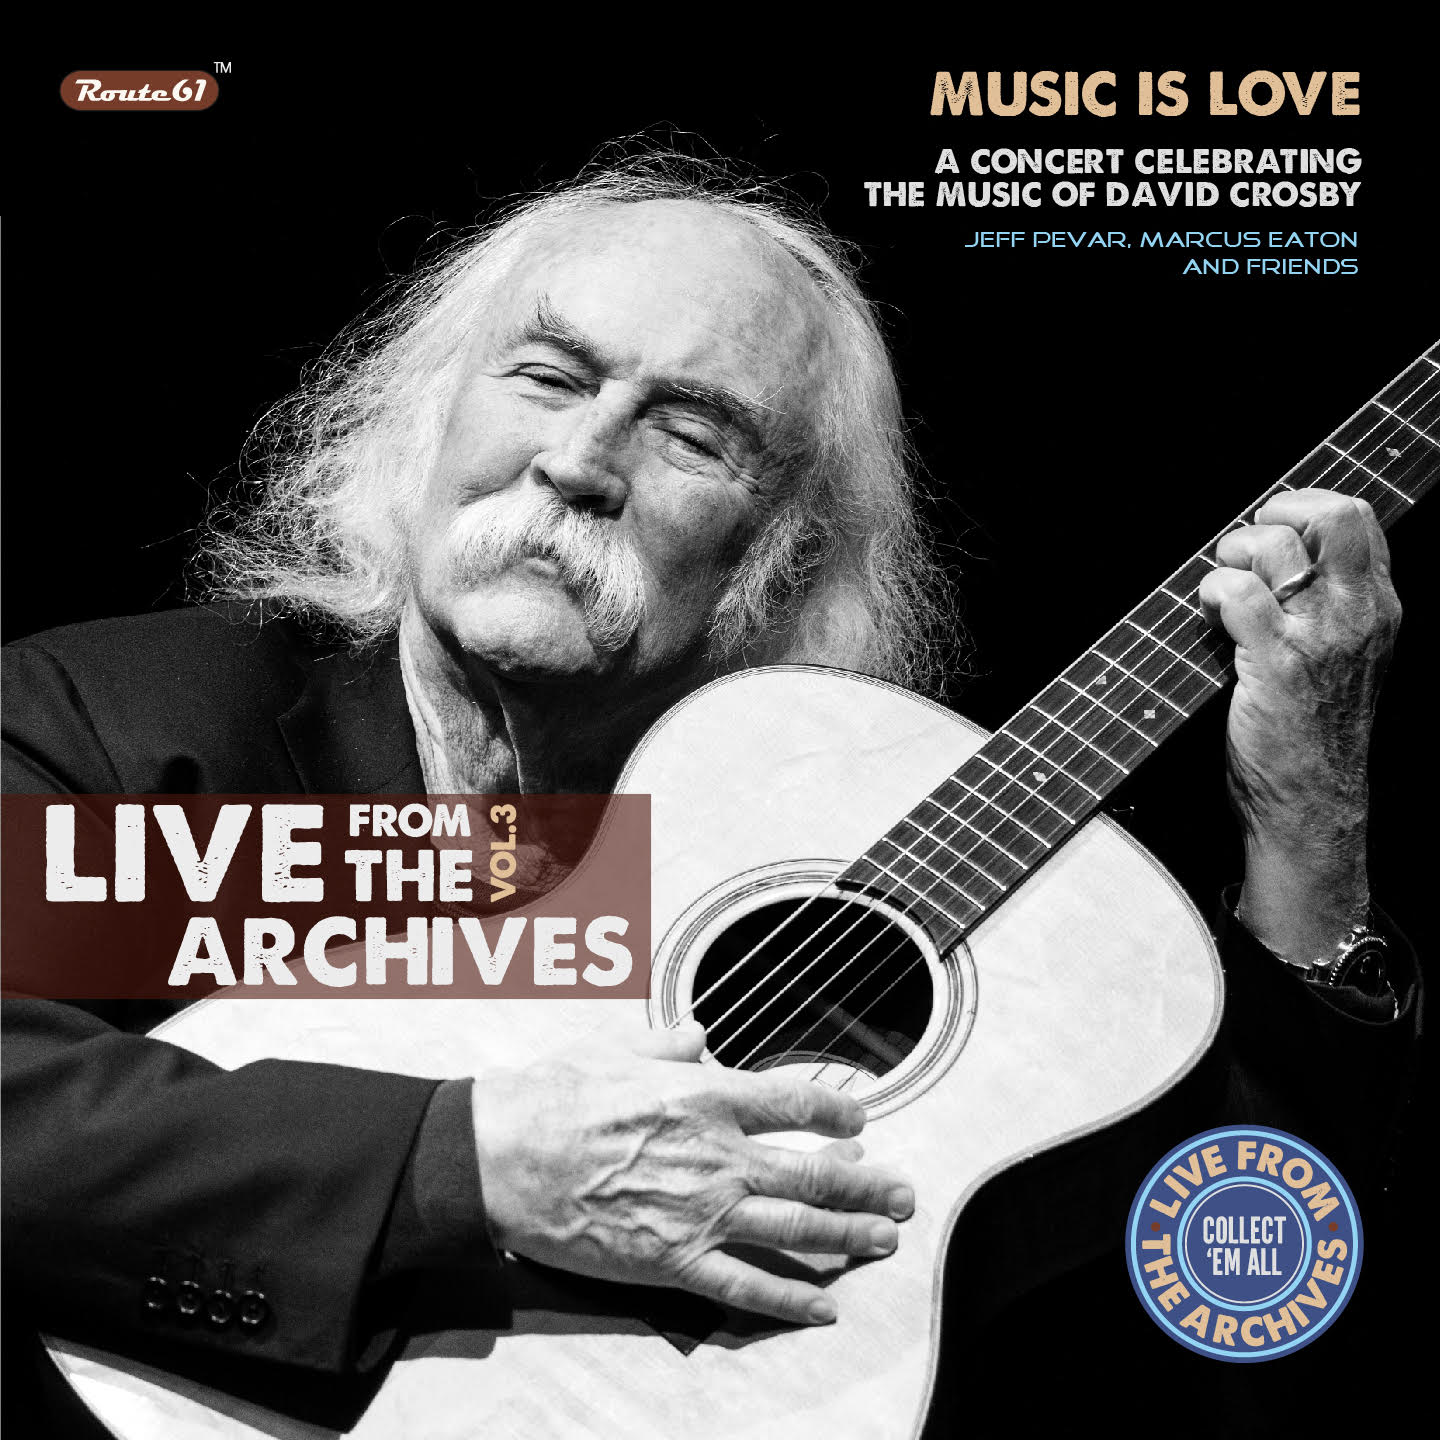 Live from the archives, vol. 3 - Music is love: a celebration of the music of David Crosby